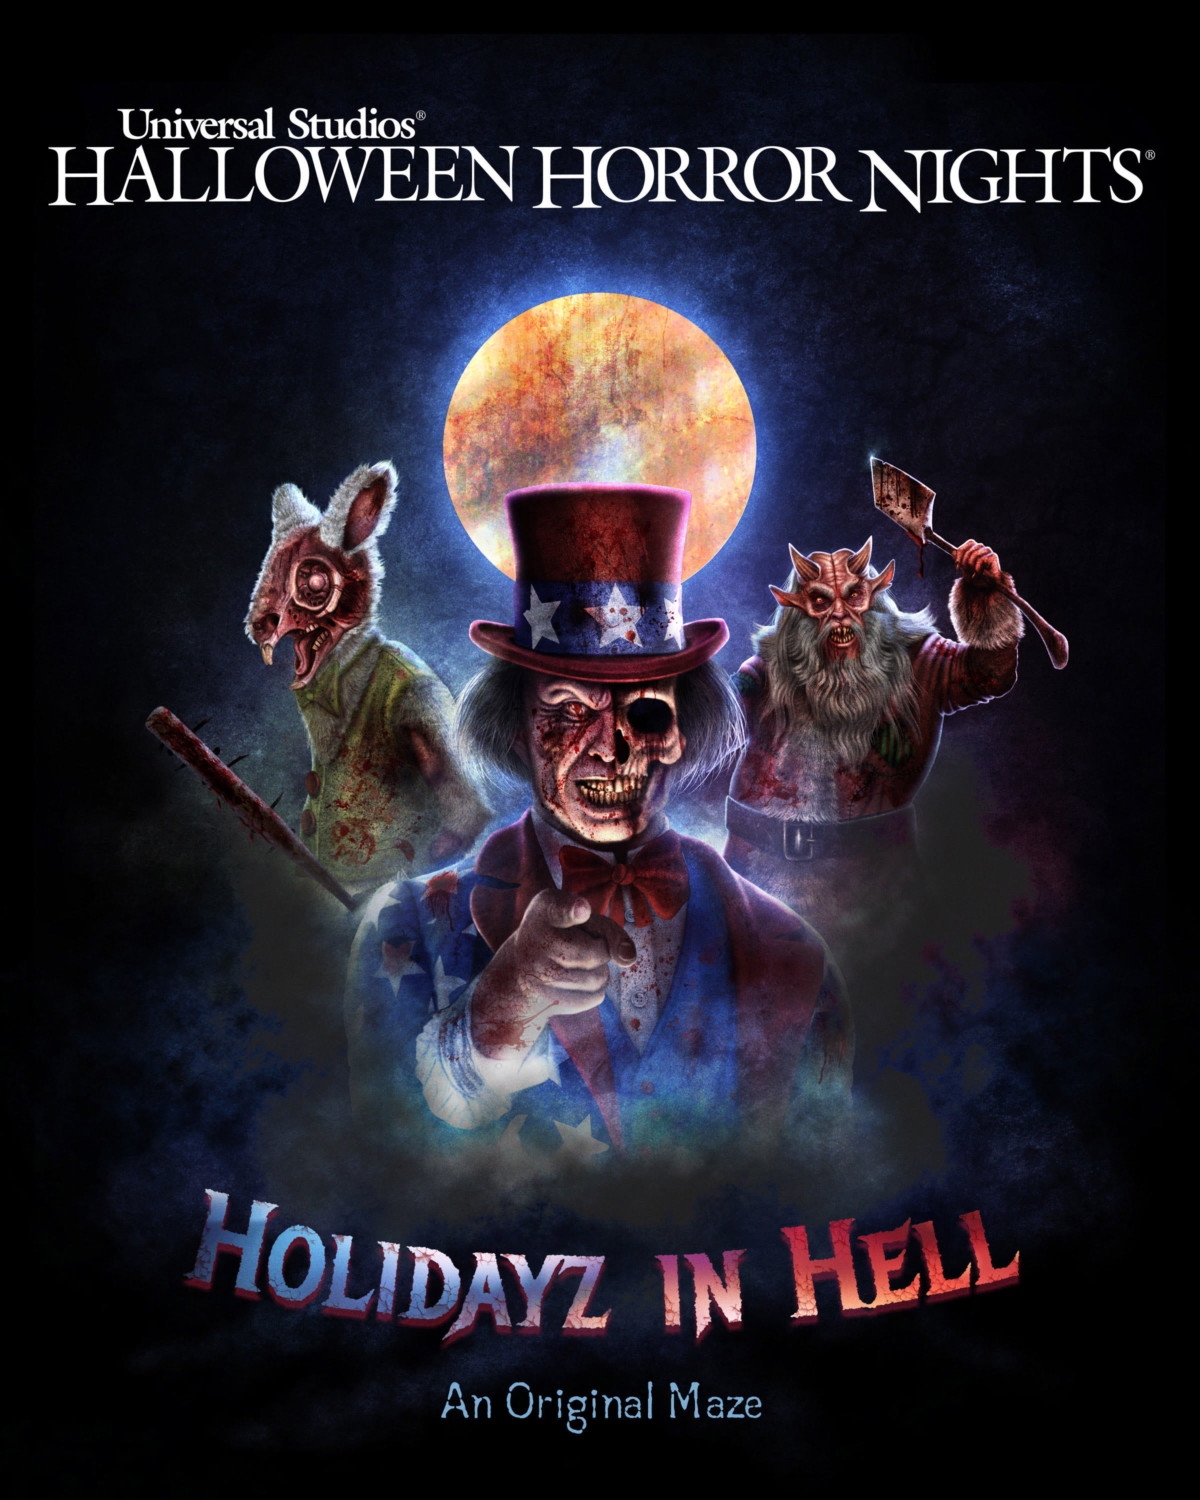 Celebrate “Holidayz in Hell” at Halloween Horror Nights Bionic Buzz